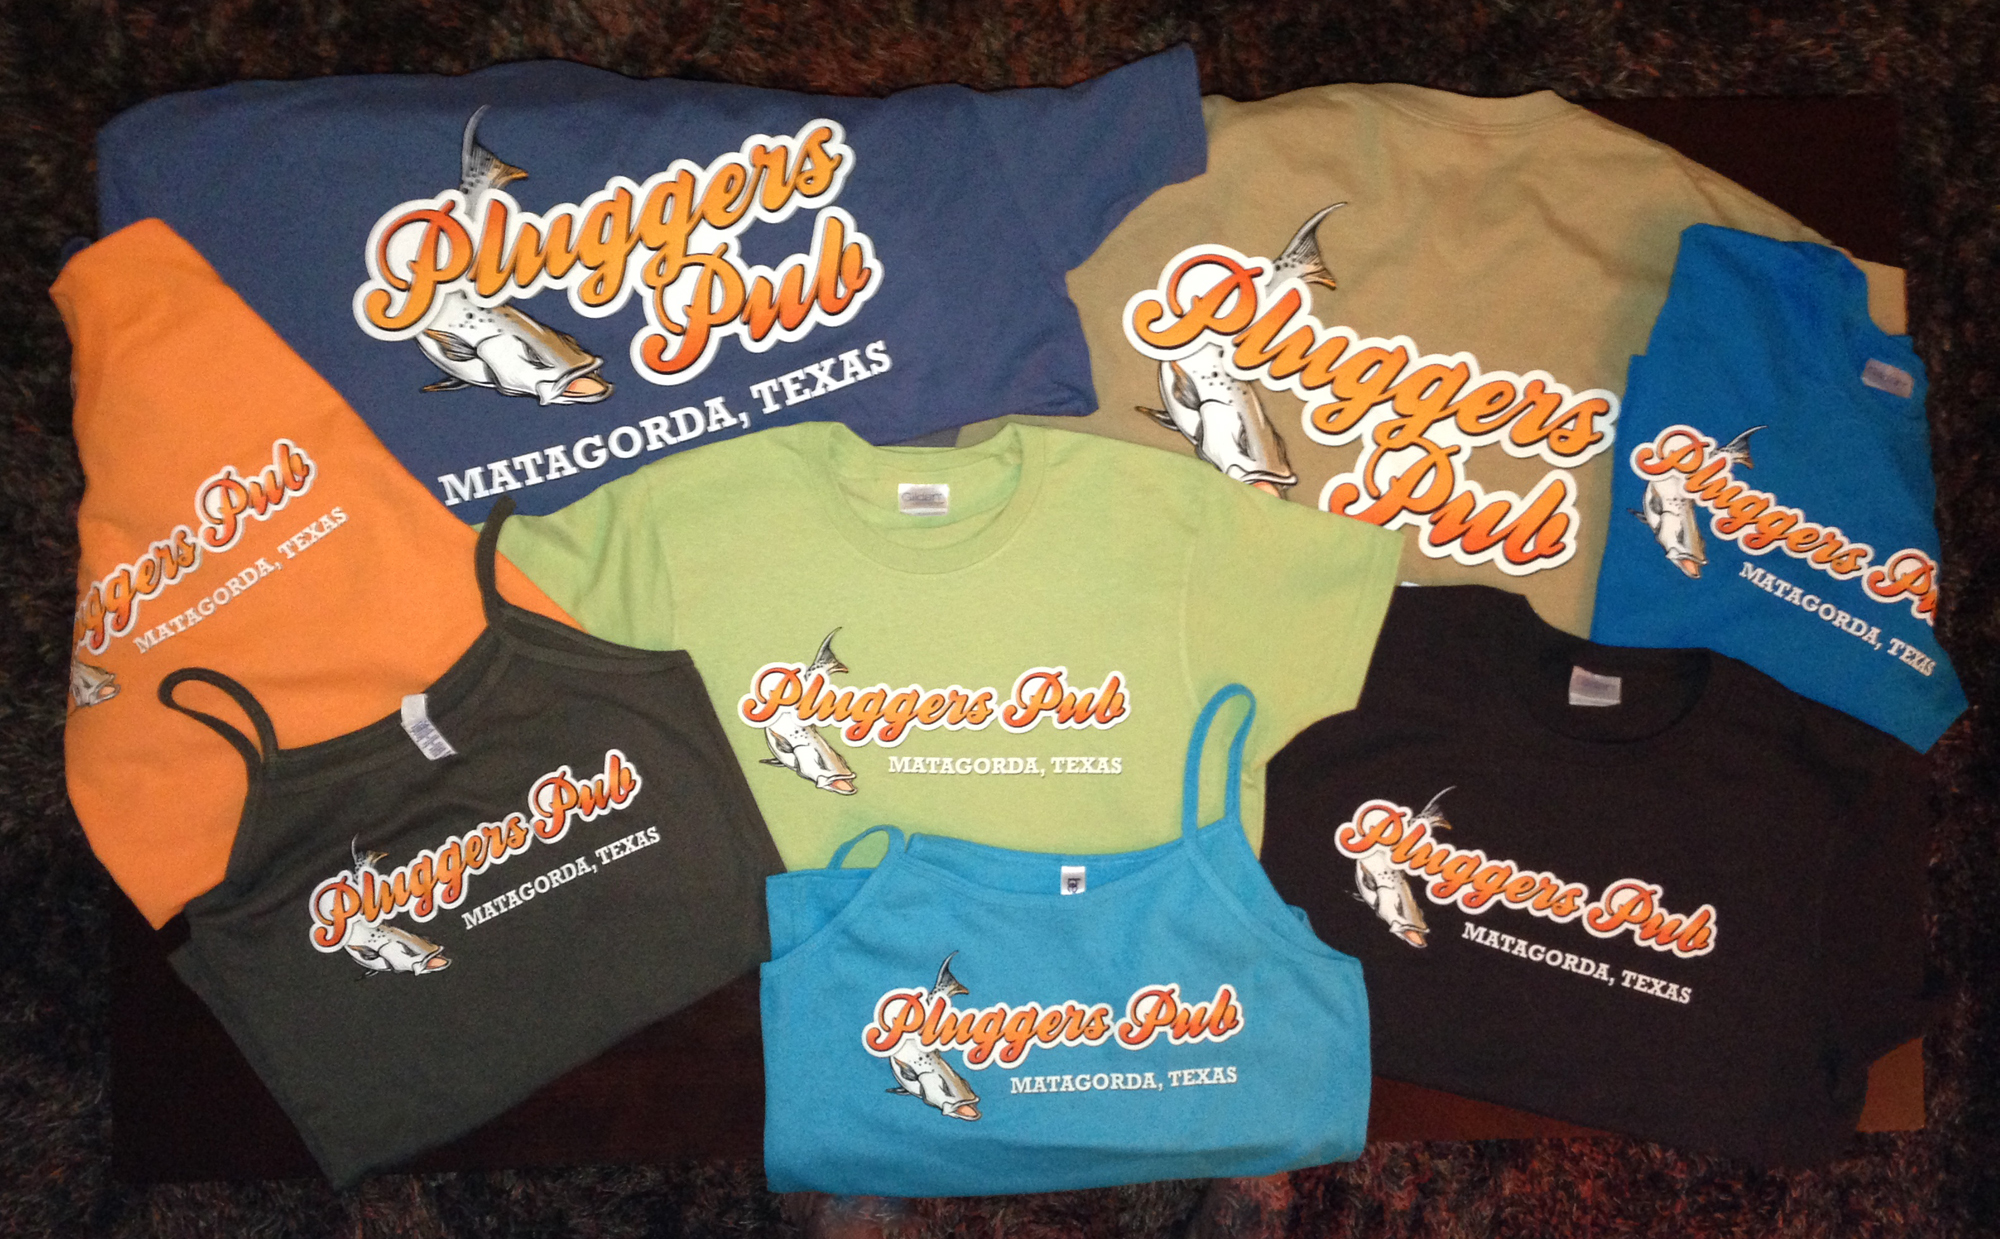 Our New T-Shirts Have Arrived!